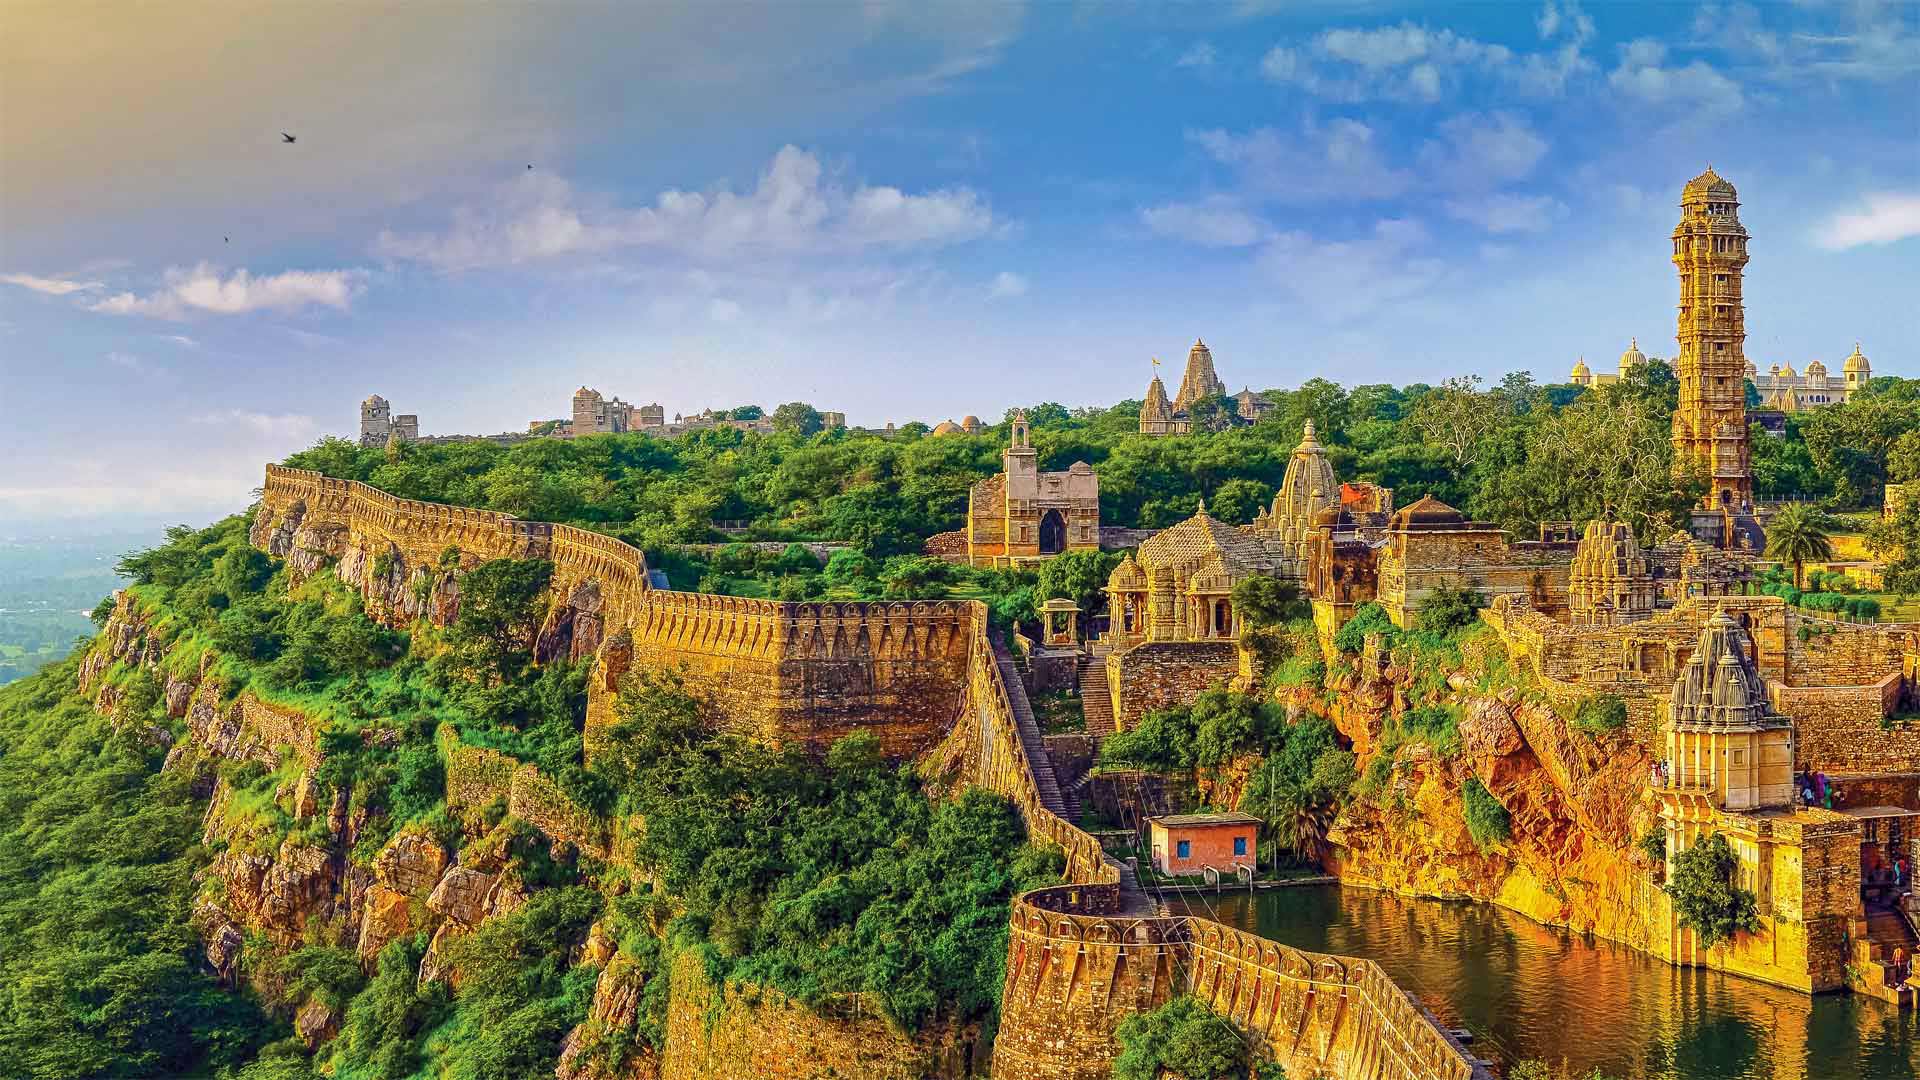 Chittorgarh Fort, India - Anand Purohit/Getty Images)